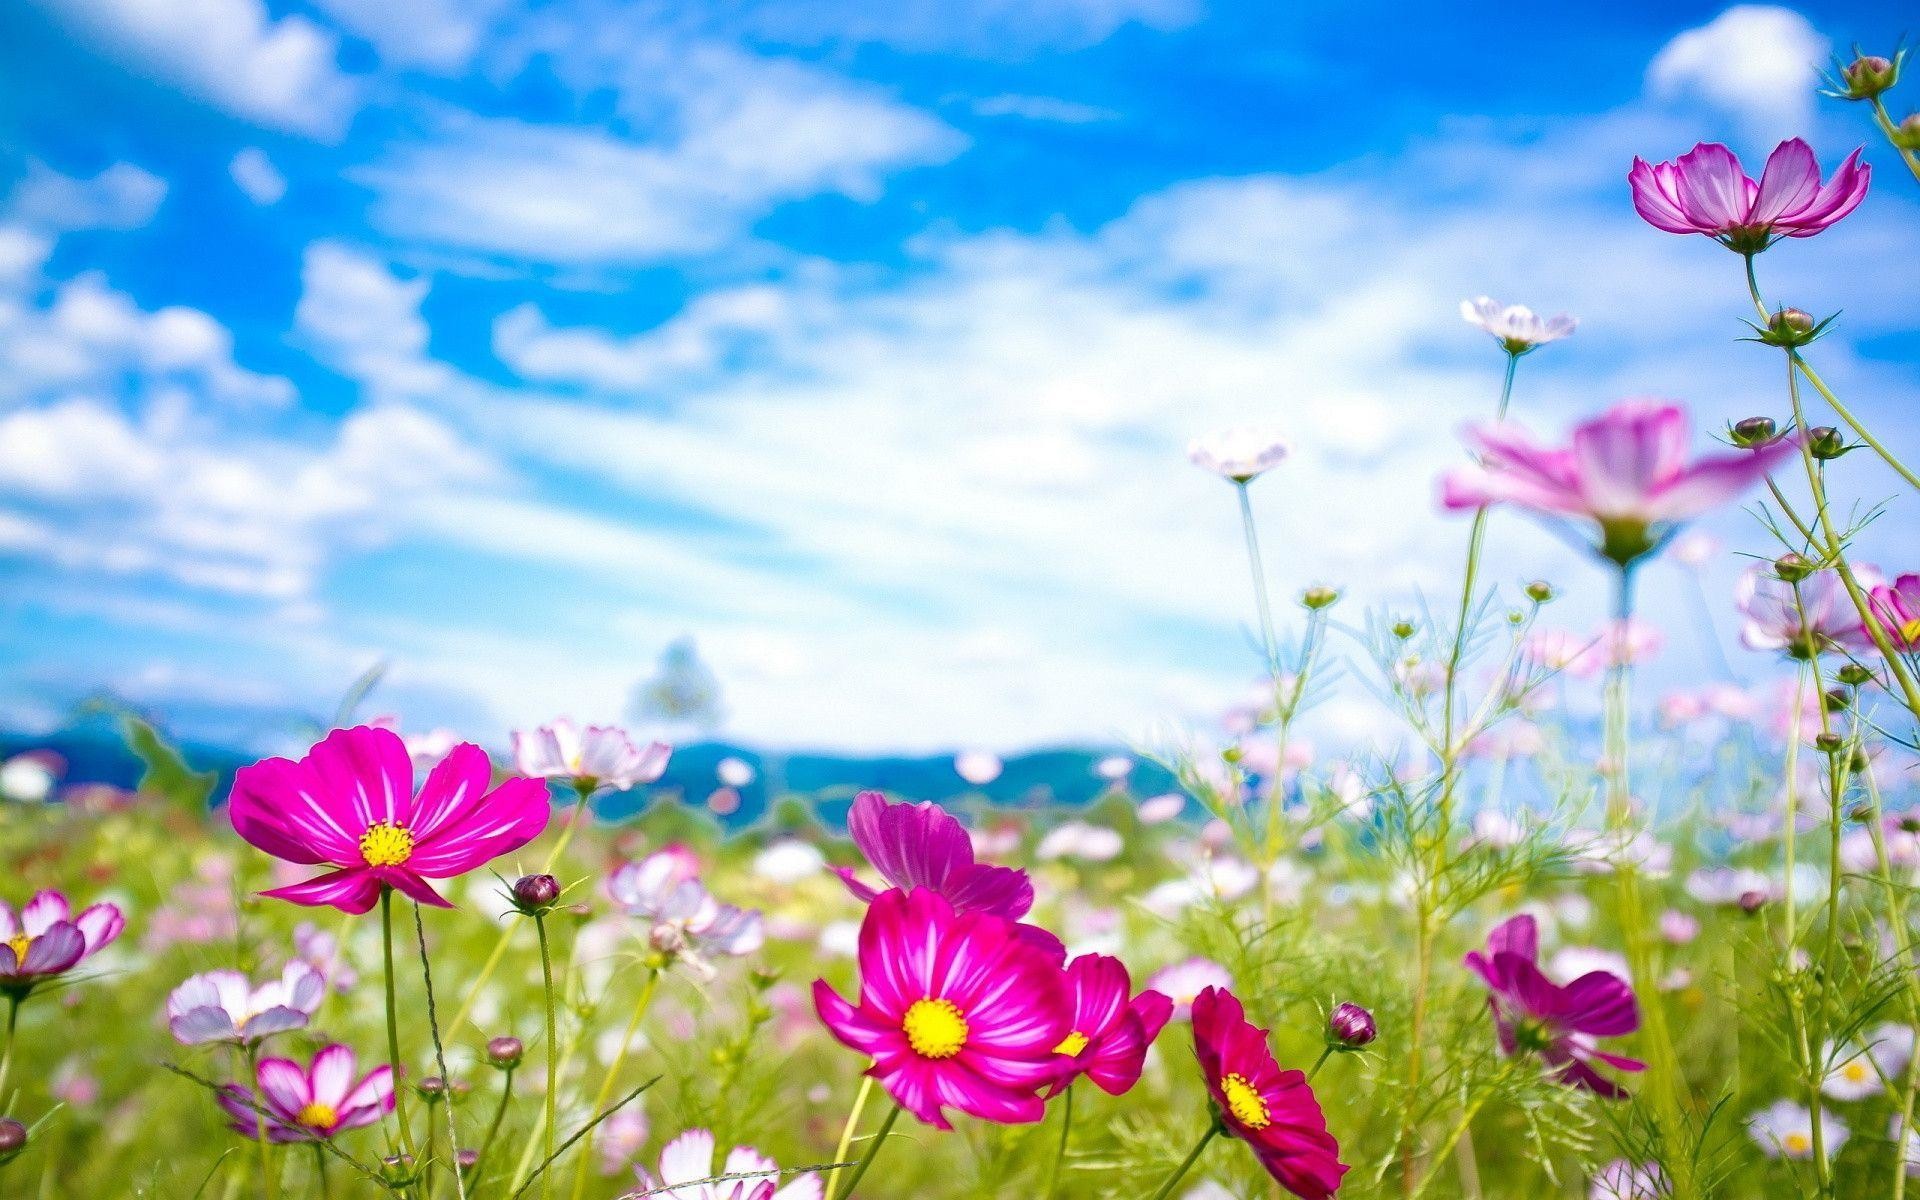 1920x1200 Summer Wallpaper Backgrounds 2014 Hd Images 3 HD Wallpapers | Hdimges.